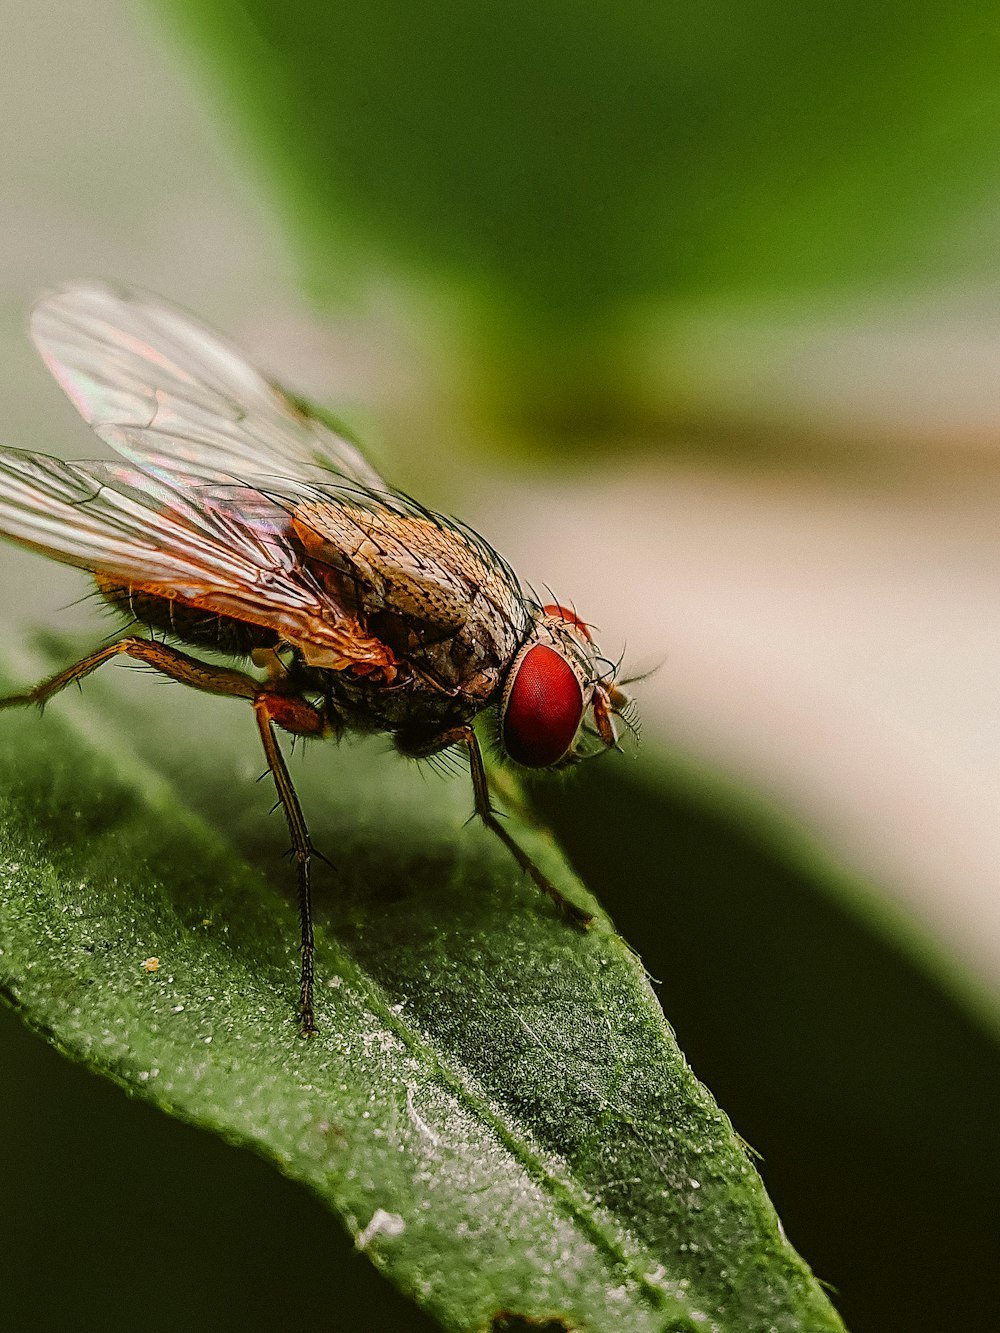 black and red fly perched on green leaf in close up photography during daytime